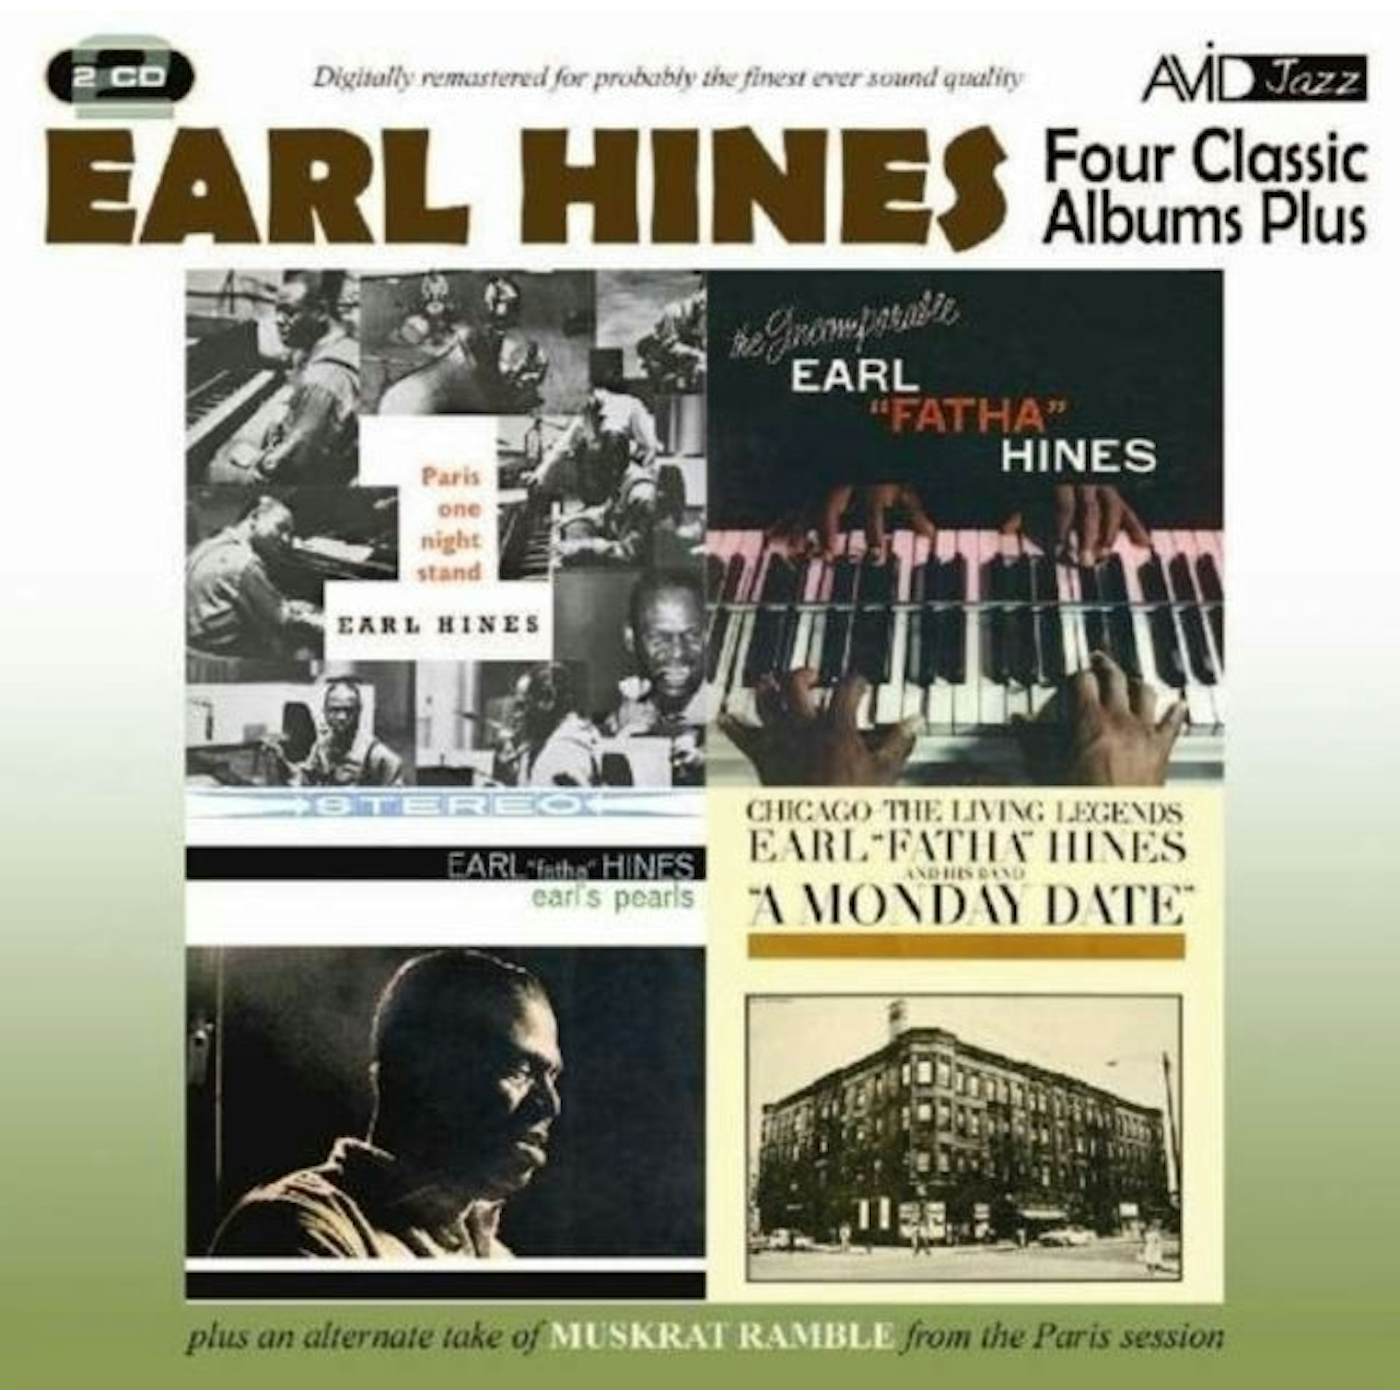 Earl Hines CD - Four Classic Albums Plus (A Monday Date / Paris One Night Stand / Earl's Pearls / The Incomparable Earl 'Fatha' Hines)